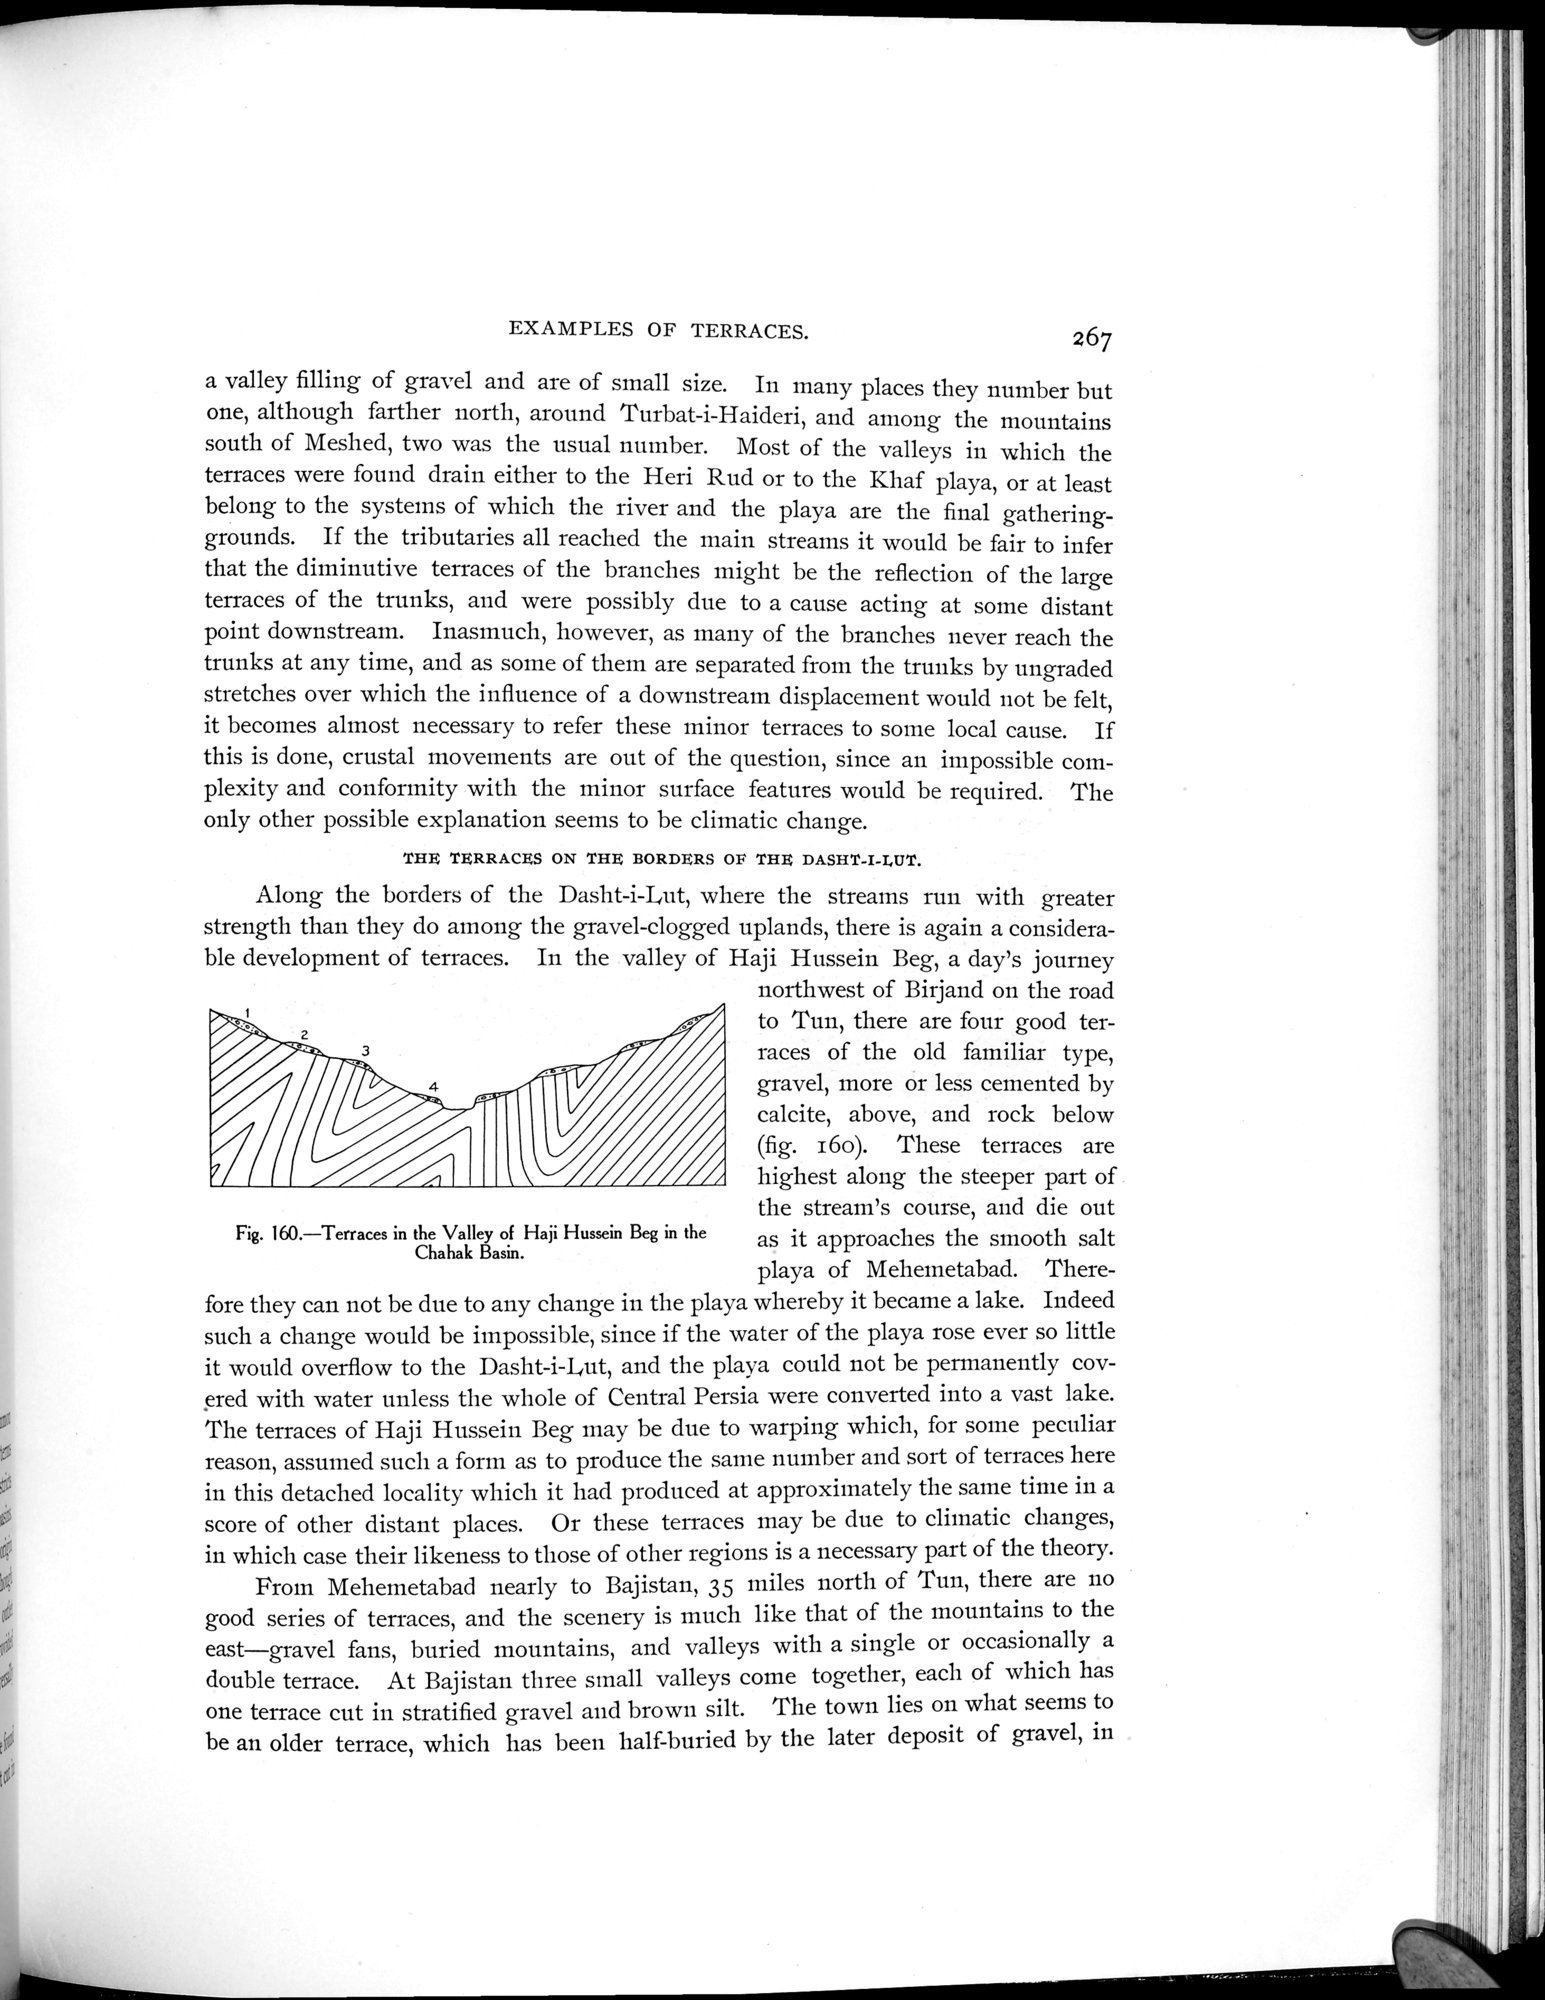 Explorations in Turkestan 1903 : vol.1 / Page 299 (Grayscale High Resolution Image)